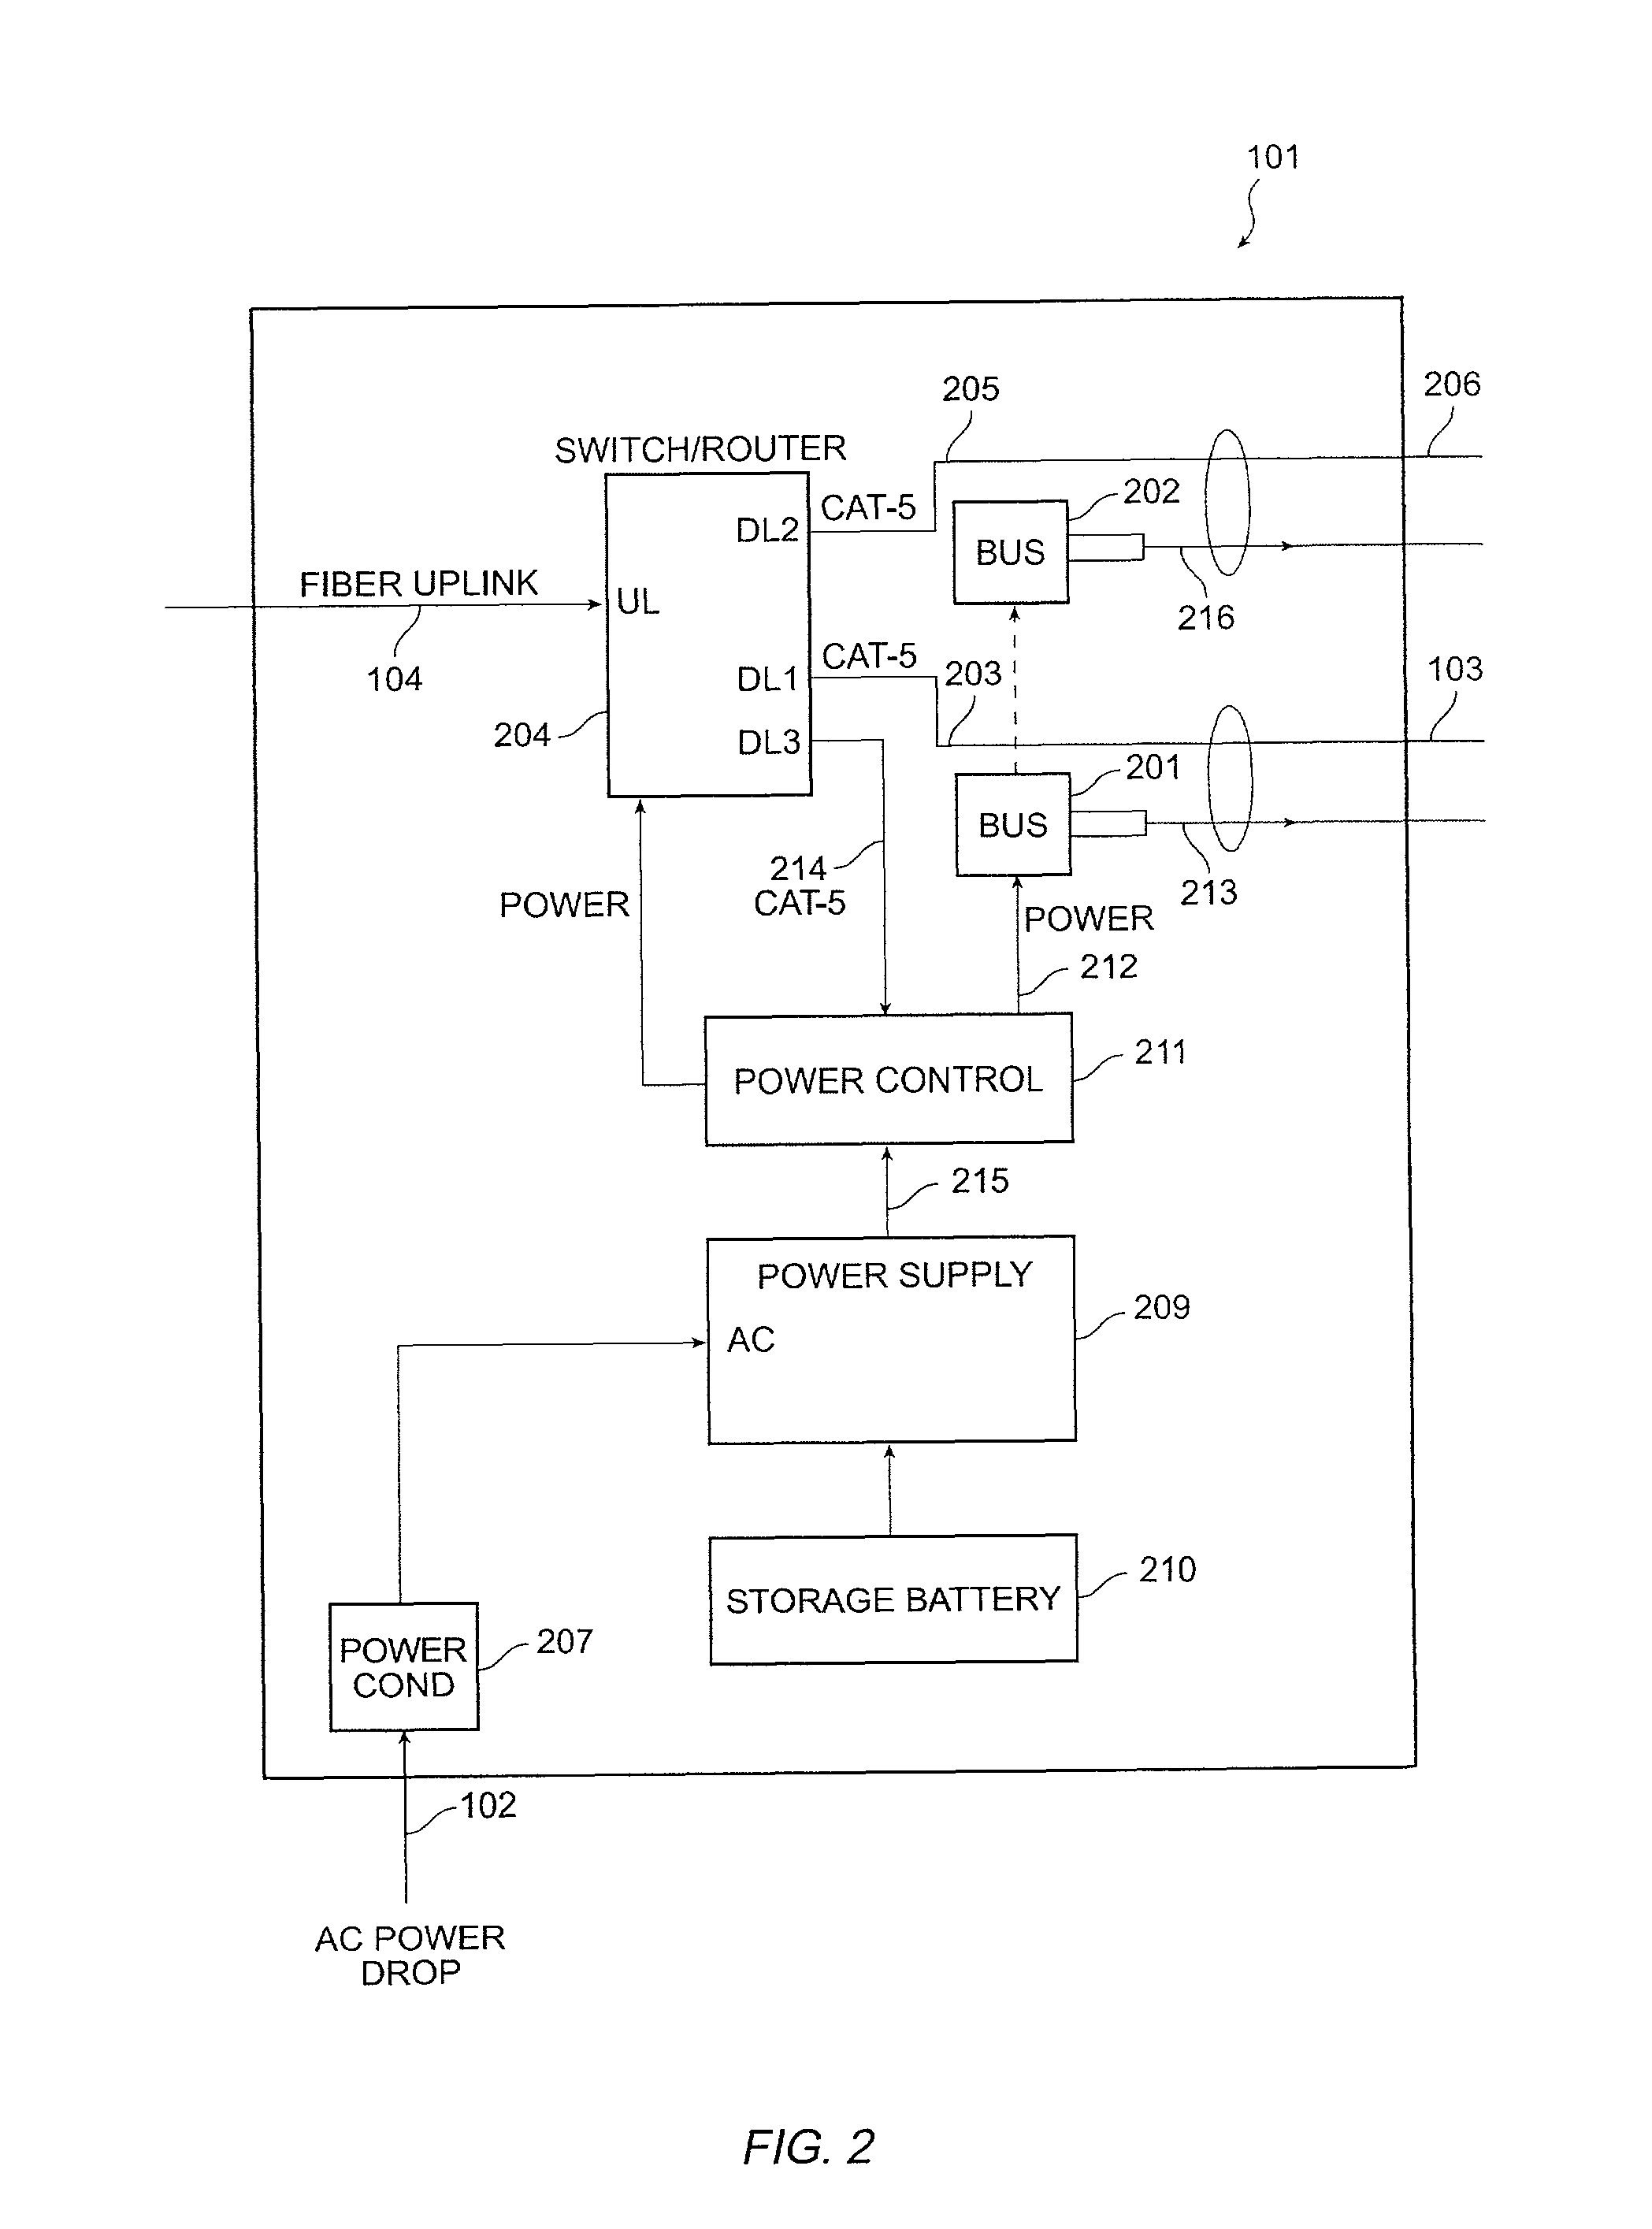 Method and apparatus for an environmentally hardened ethernet network system